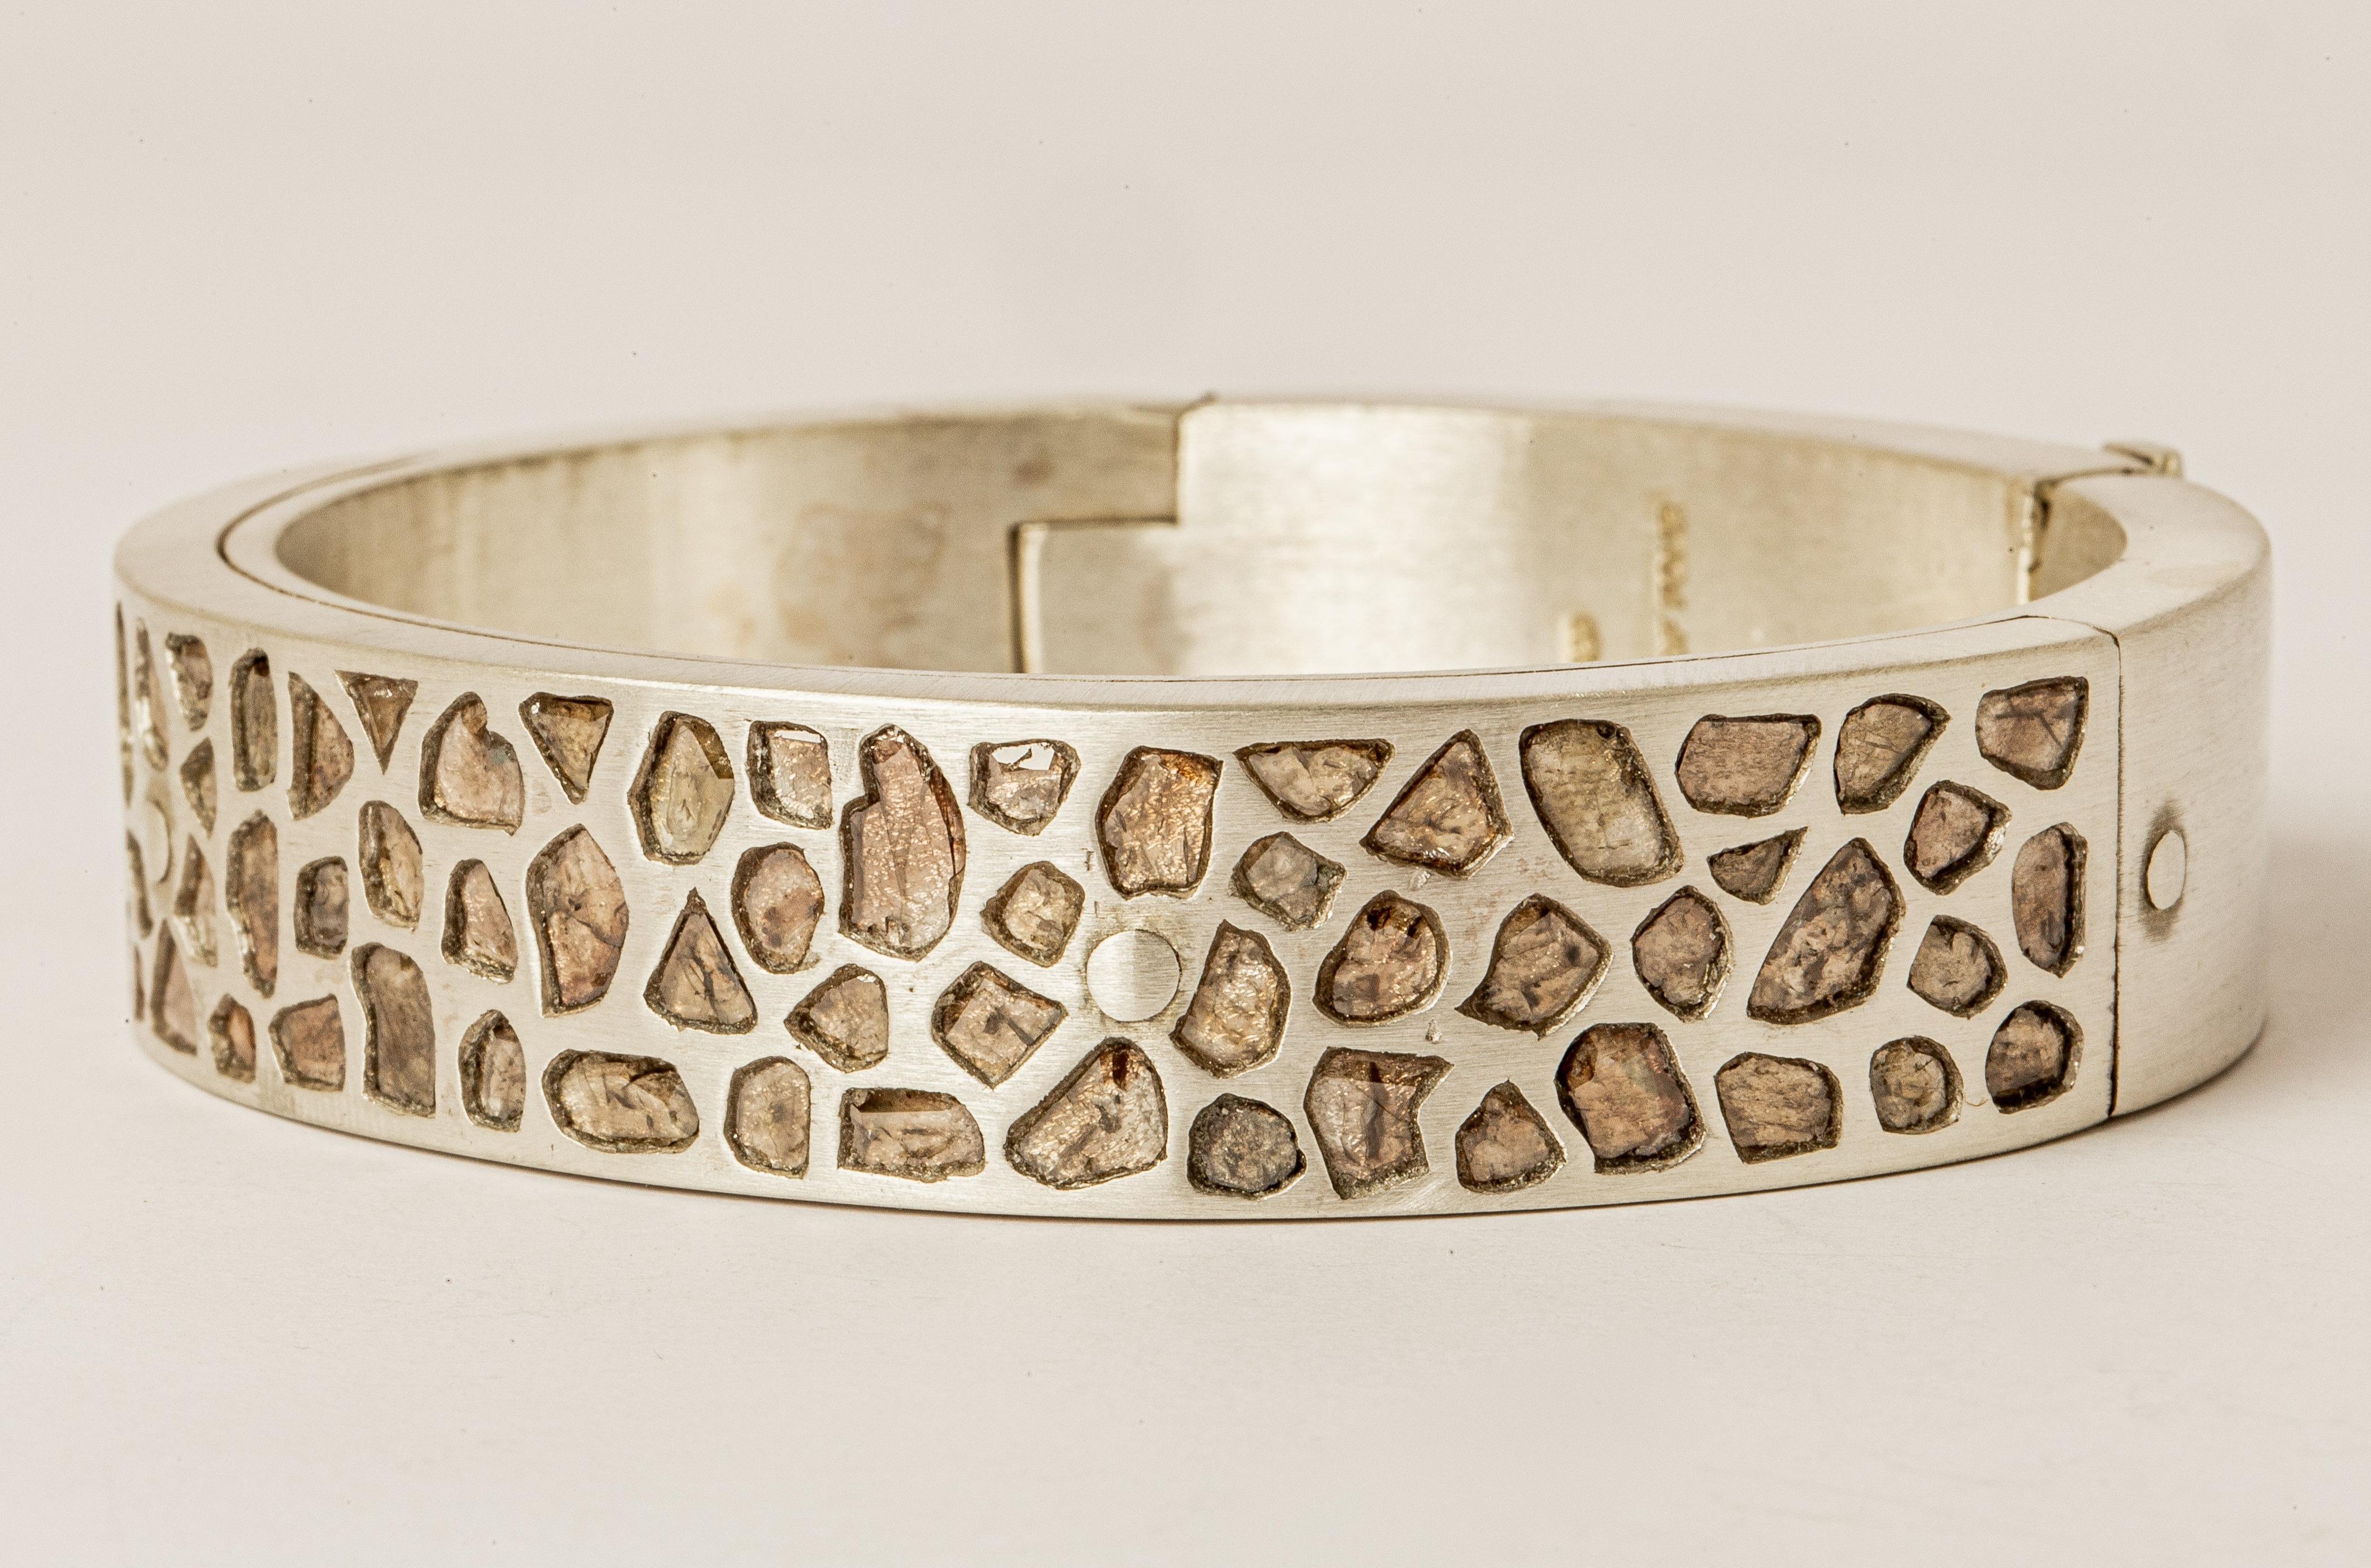 Sistema bracelet in sterling silver and slabs of rough diamond. These slabs are removed from a larger chunk of diamond. Each stone fragment and shape are absolutely unique and this is what makes it special. The 